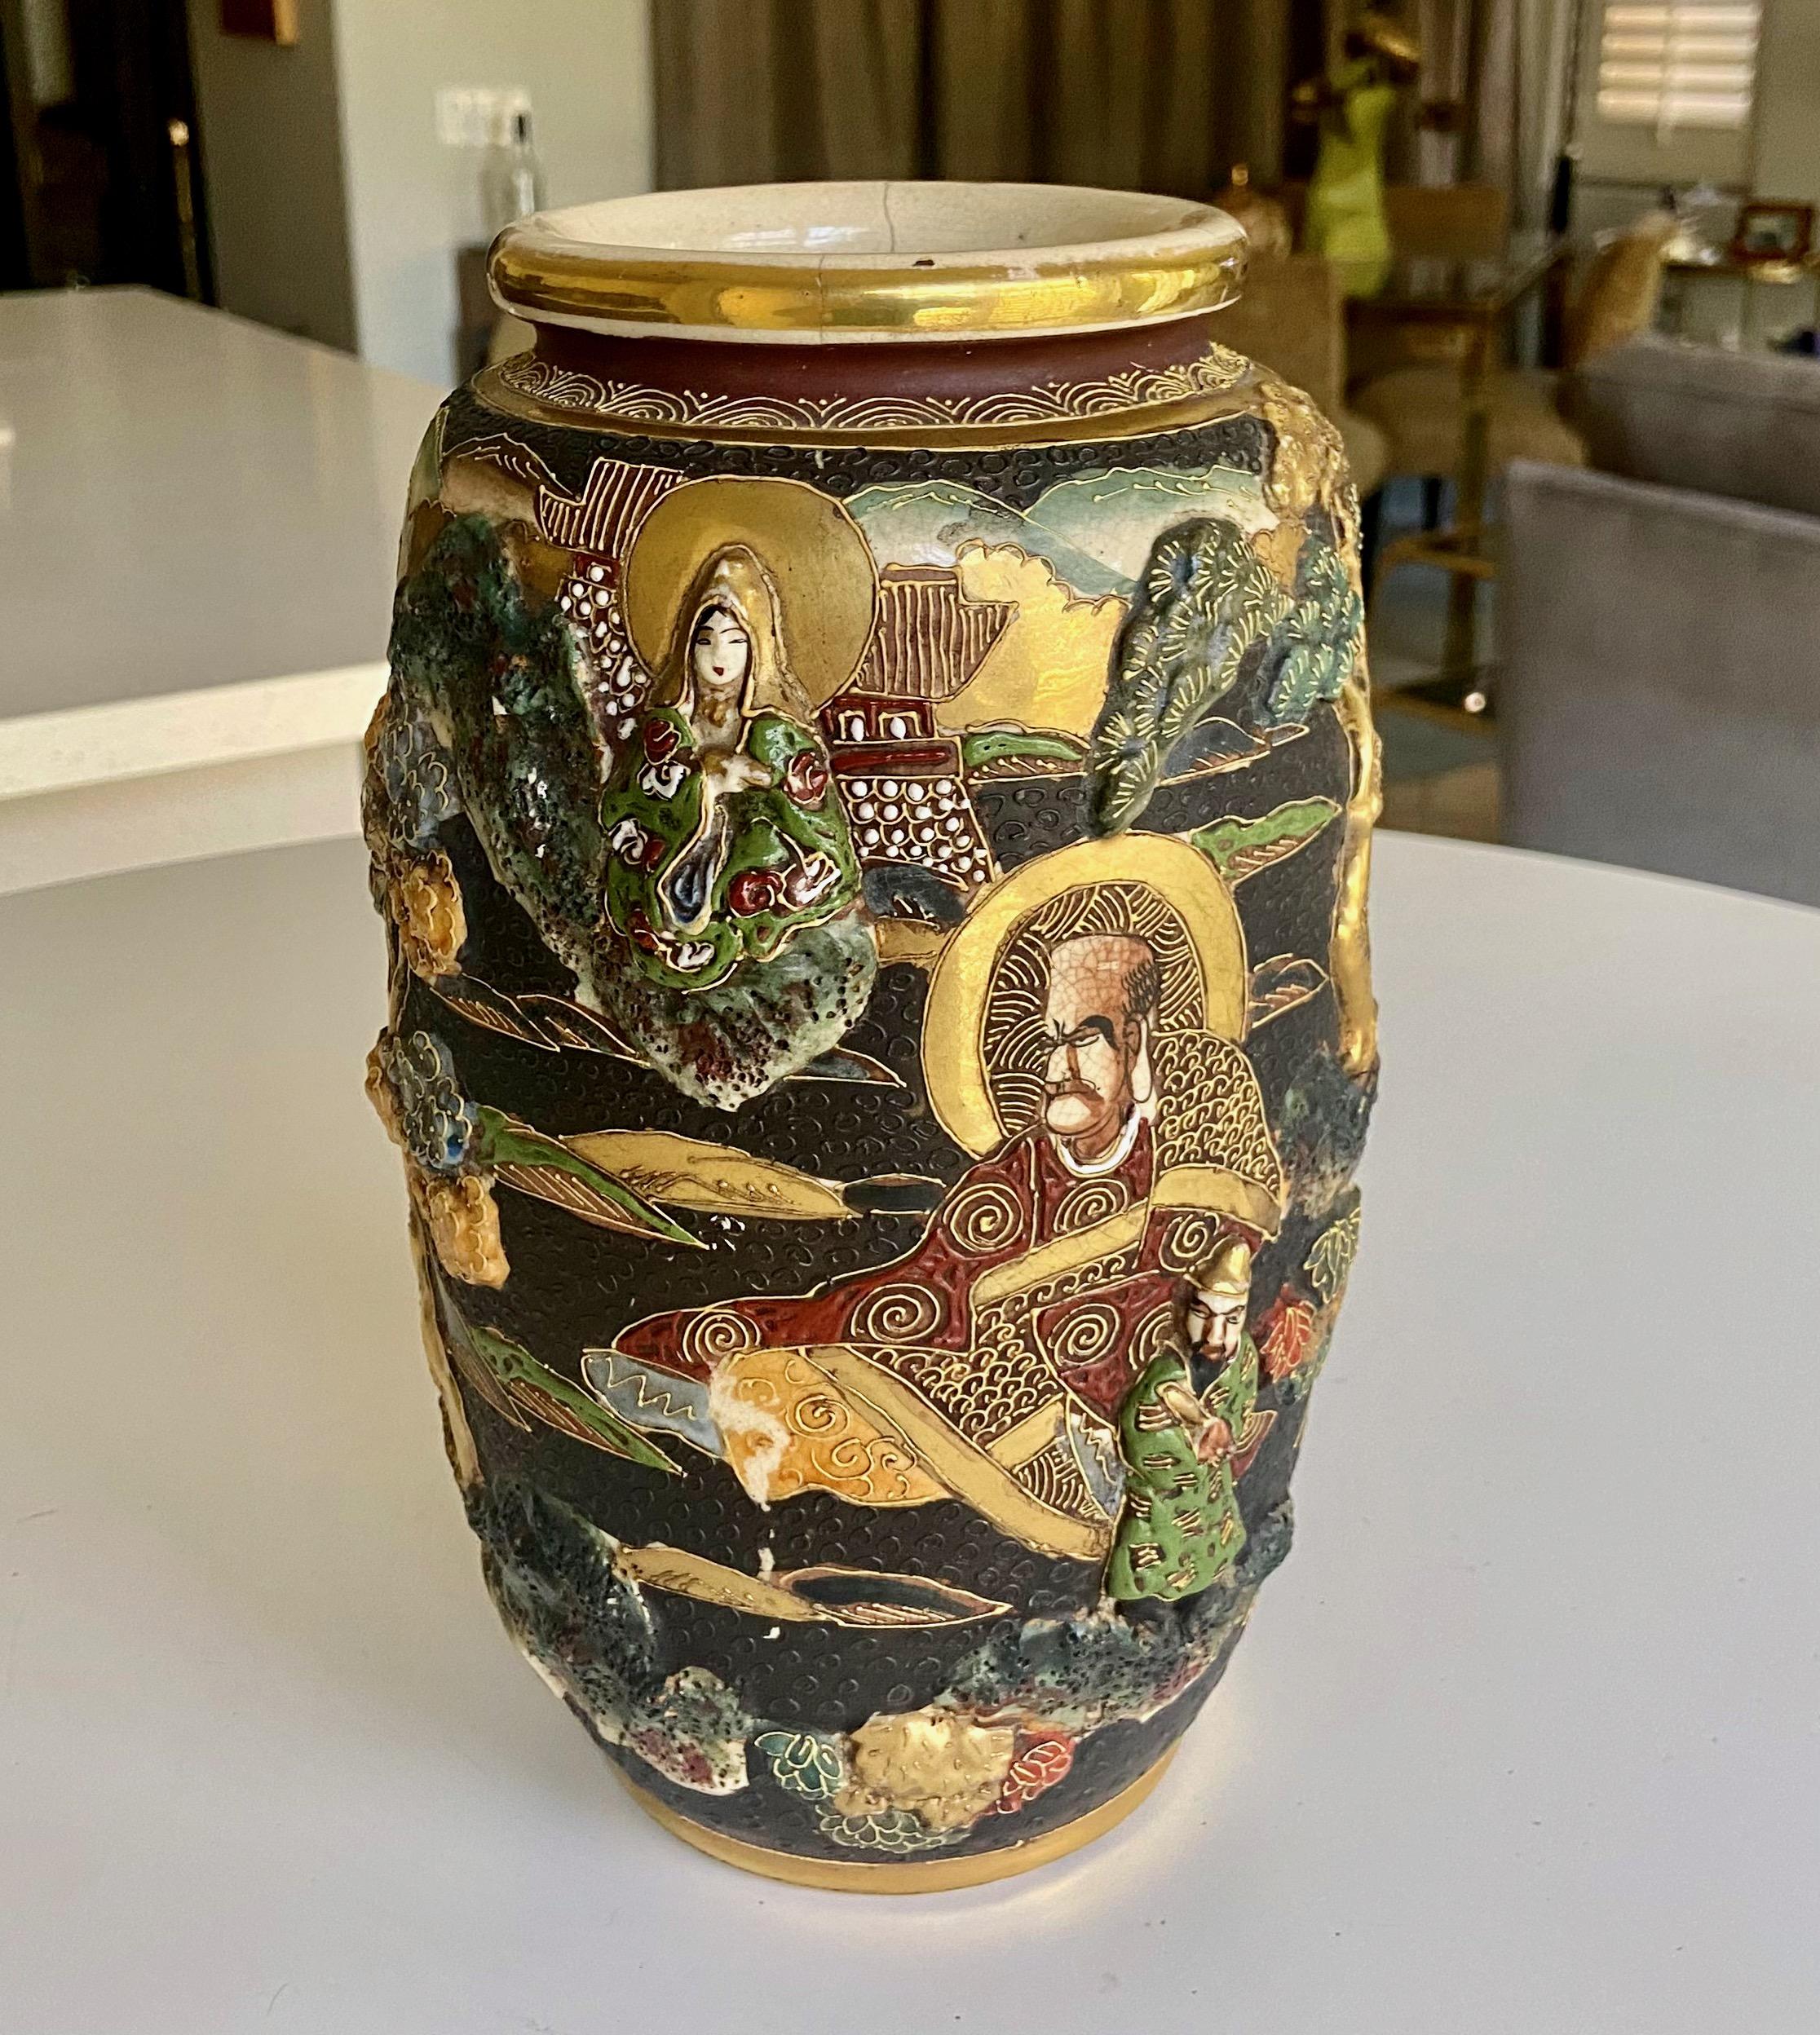 Antique 20th century Japanese hand painted ceramic pottery vase. Embellished with gold gilt accents and raised enamel figural and tree decorations. Signed. 